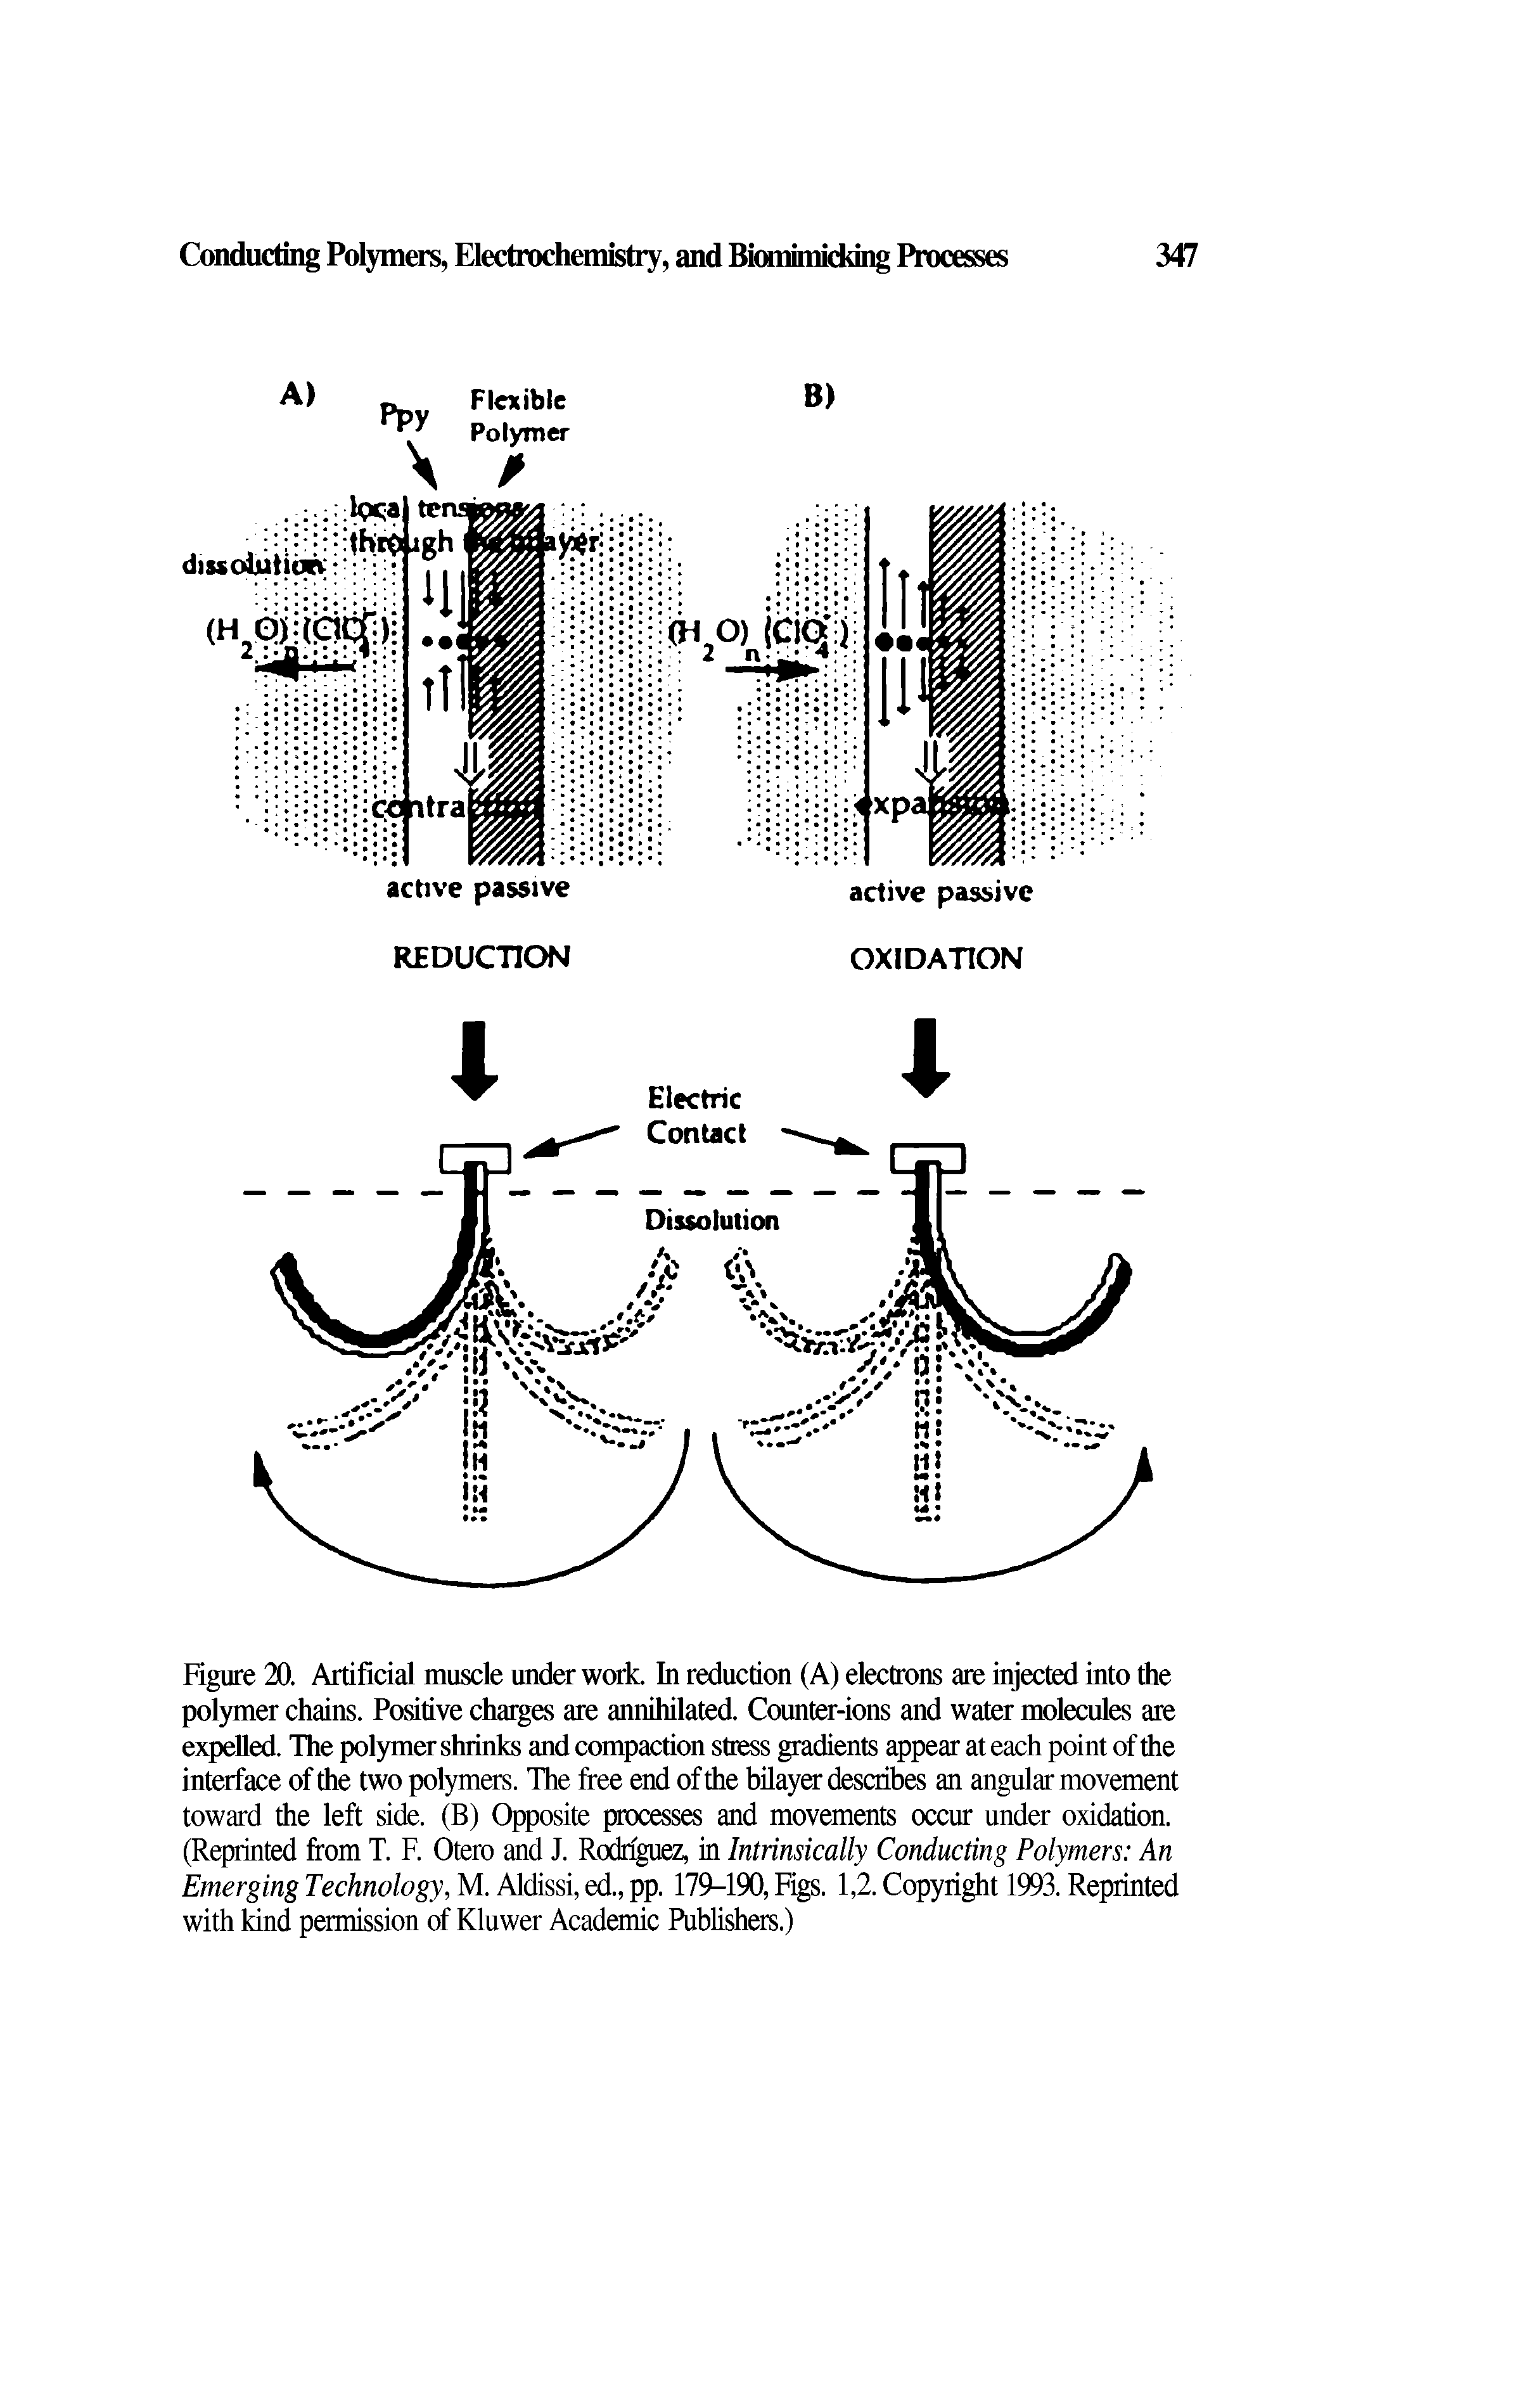 Figure 20. Artificial muscle under work. In reduction (A) electrons are injected into the polymer chains. Positive charges are annihilated. Counter-ions and water molecules are expelled. The polymer shrinks and compaction stress gradients appear at each point of the interface of the two polymers. The free end of the bilayer describes an angular movement toward the left side. (B) Opposite processes and movements occur under oxidation. (Reprinted from T. F. Otero and J. Rodriguez, in Intrinsically Conducting Polymers An Emerging Technology, M. Aldissi, ed., pp. 179-190, Figs. 1,2. Copyright 1993. Reprinted with kind permission of Kluwer Academic Publishers.)...